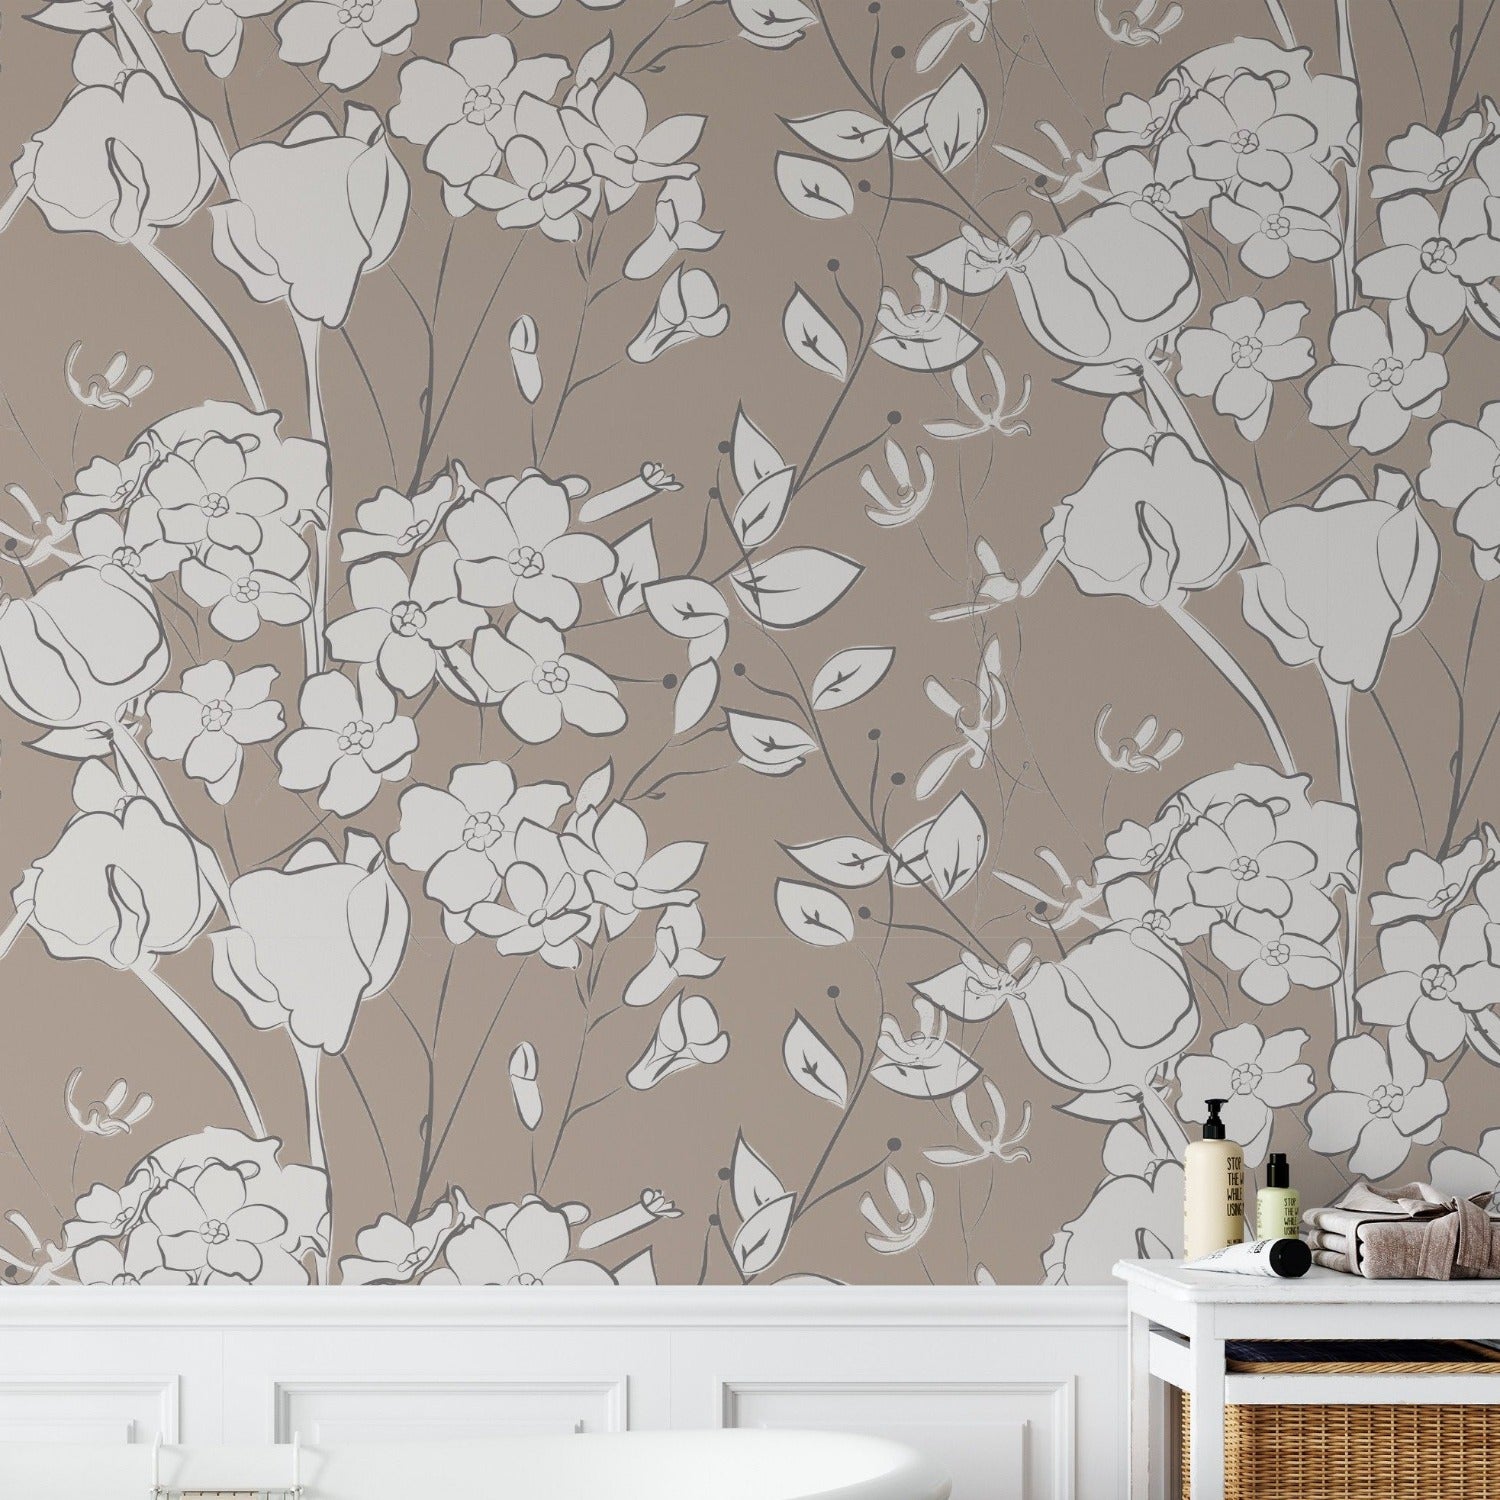 The "Floral Line Art Wallpaper" in a stylish bathroom setting, where the clean white lines of the floral design offer a stark contrast against the taupe backdrop. This wallpaper creates a refined and artistic ambiance around the classic white bathtub, enhancing the bathroom’s modern and chic decor.